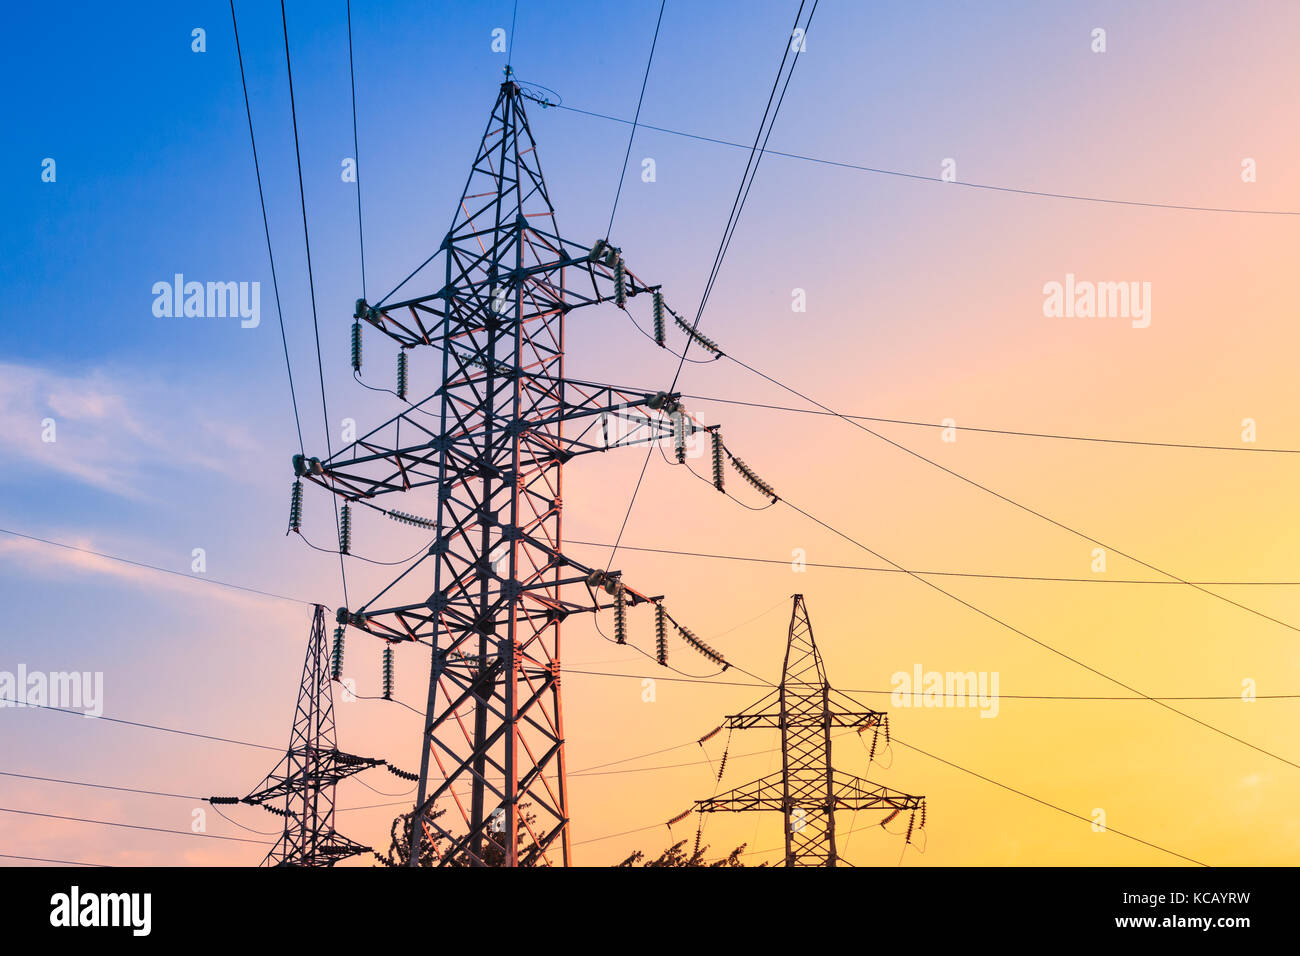 High voltage electricity pylons and transmission power lines on the blue sky background. Stock Photo